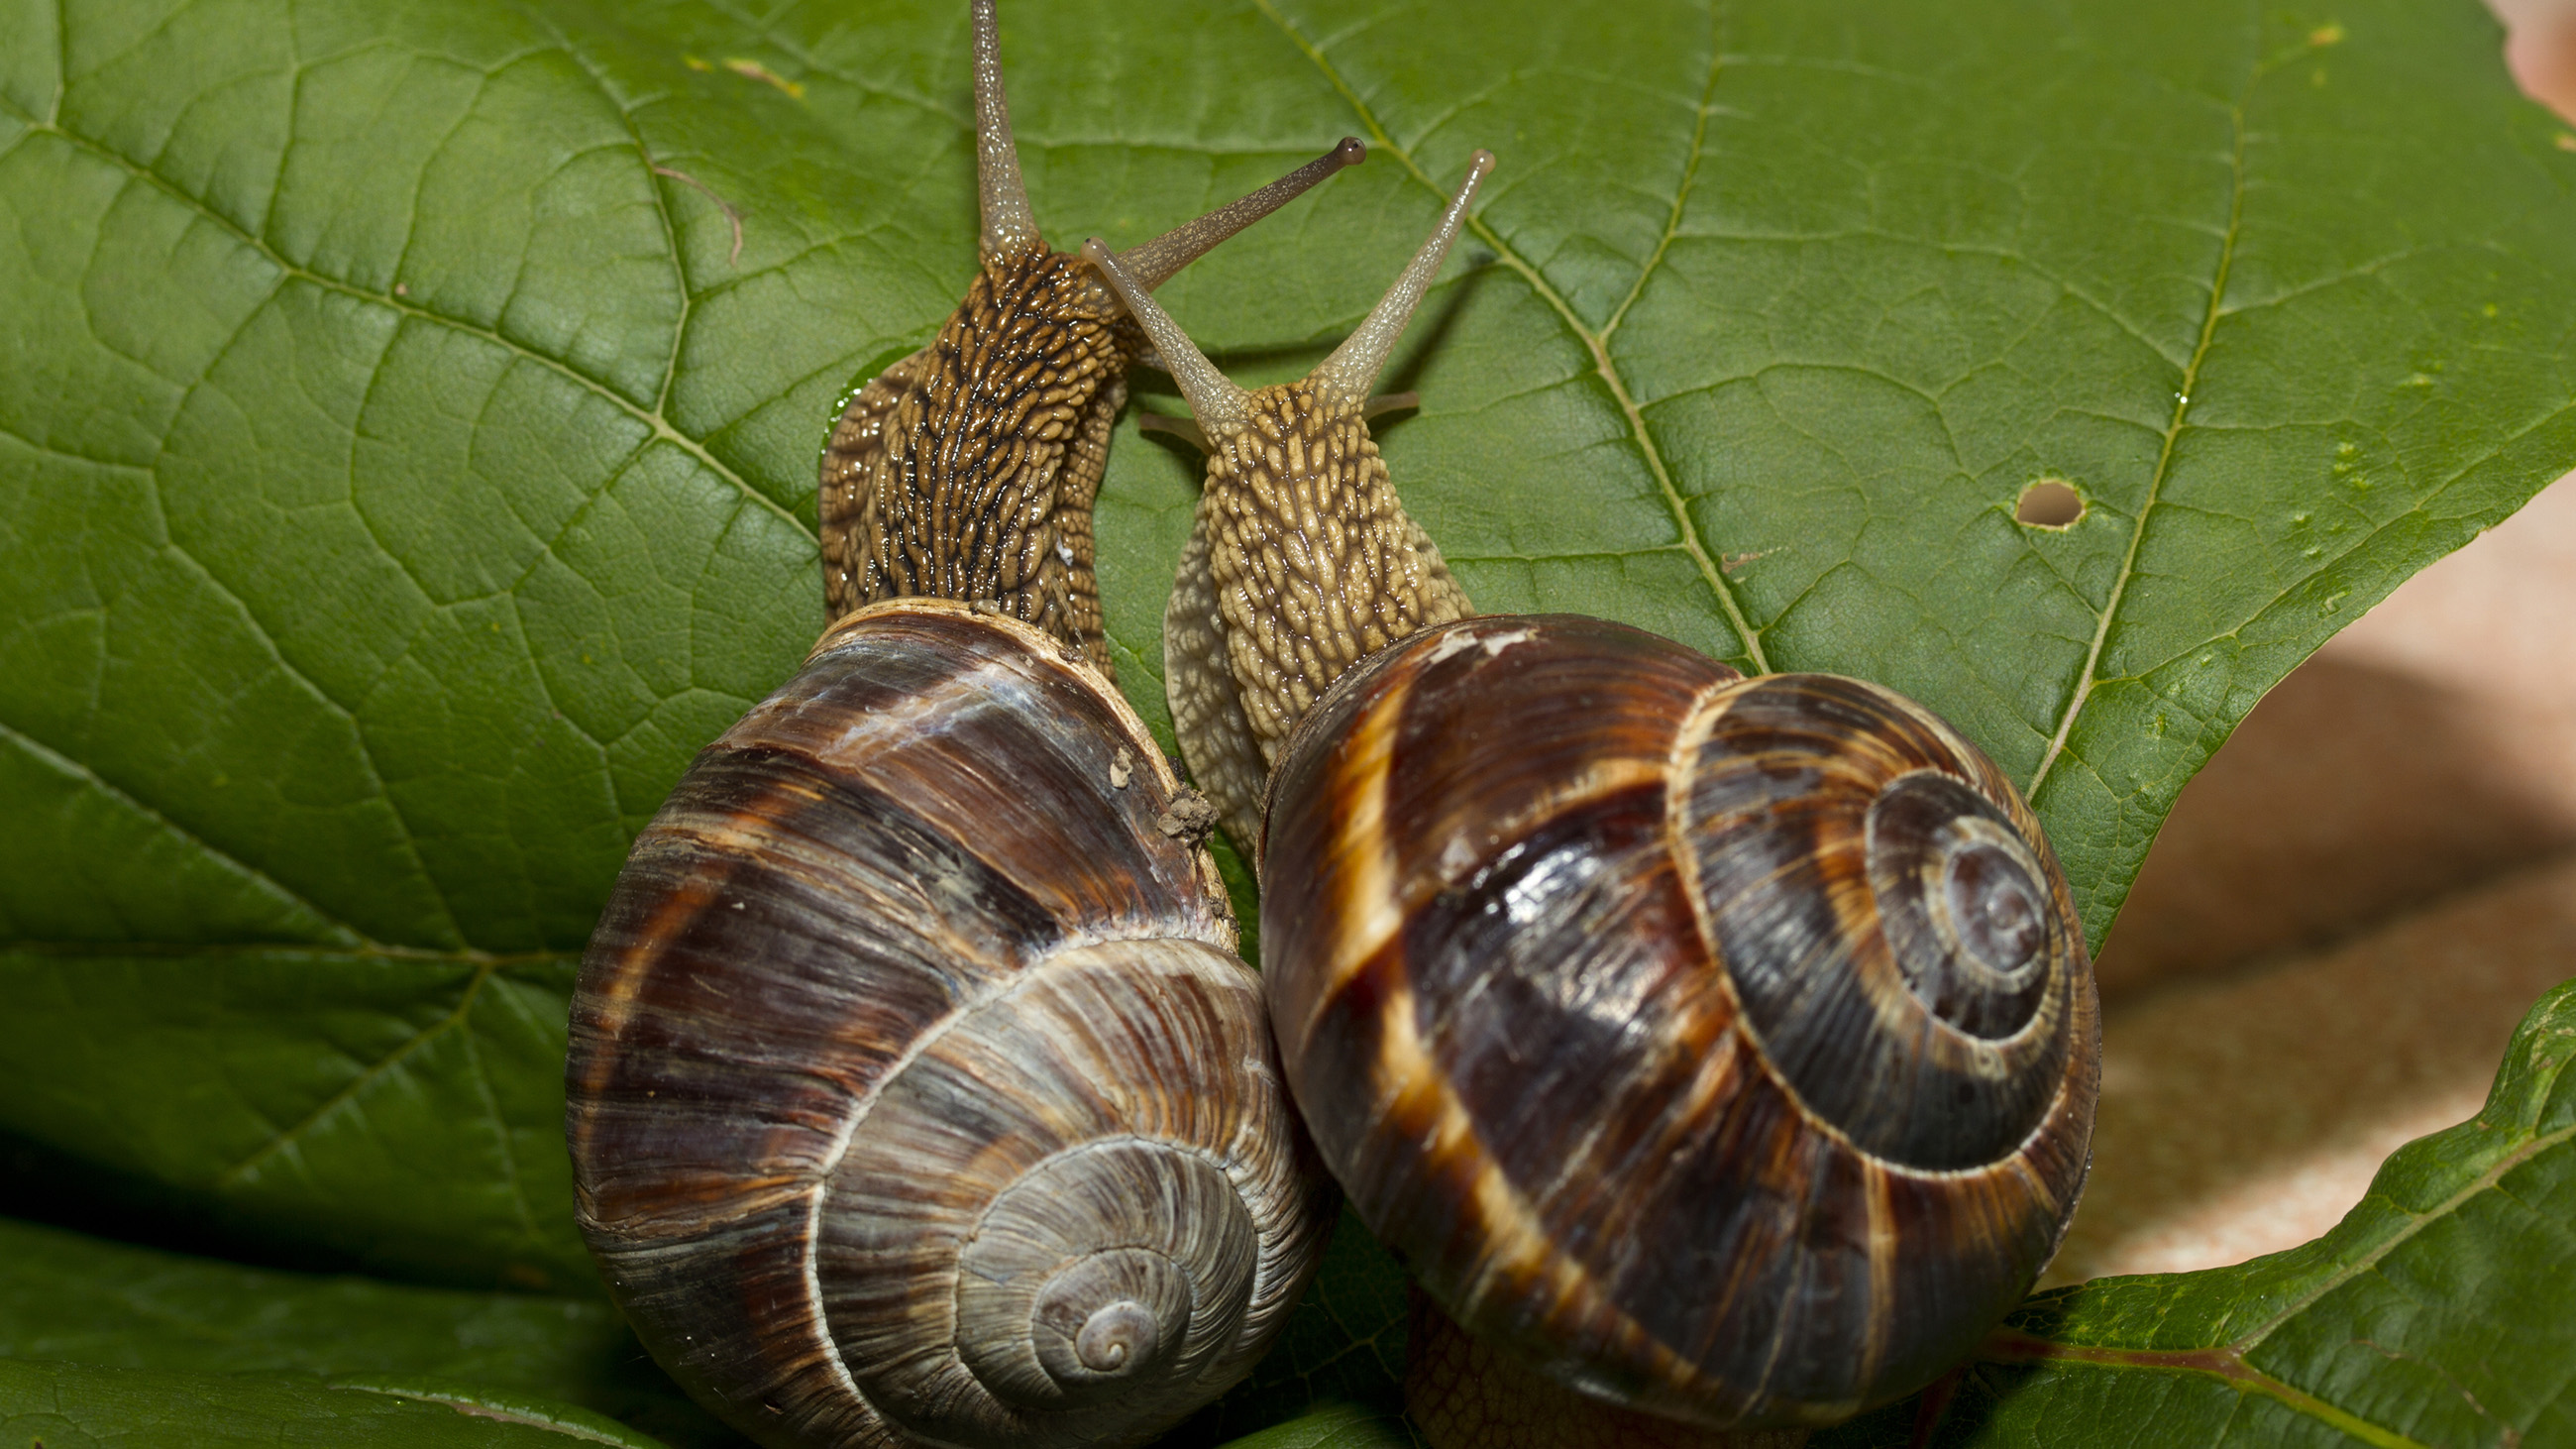 Abstracts: Snails in Love, Election Polls, Speedy Bats, and More